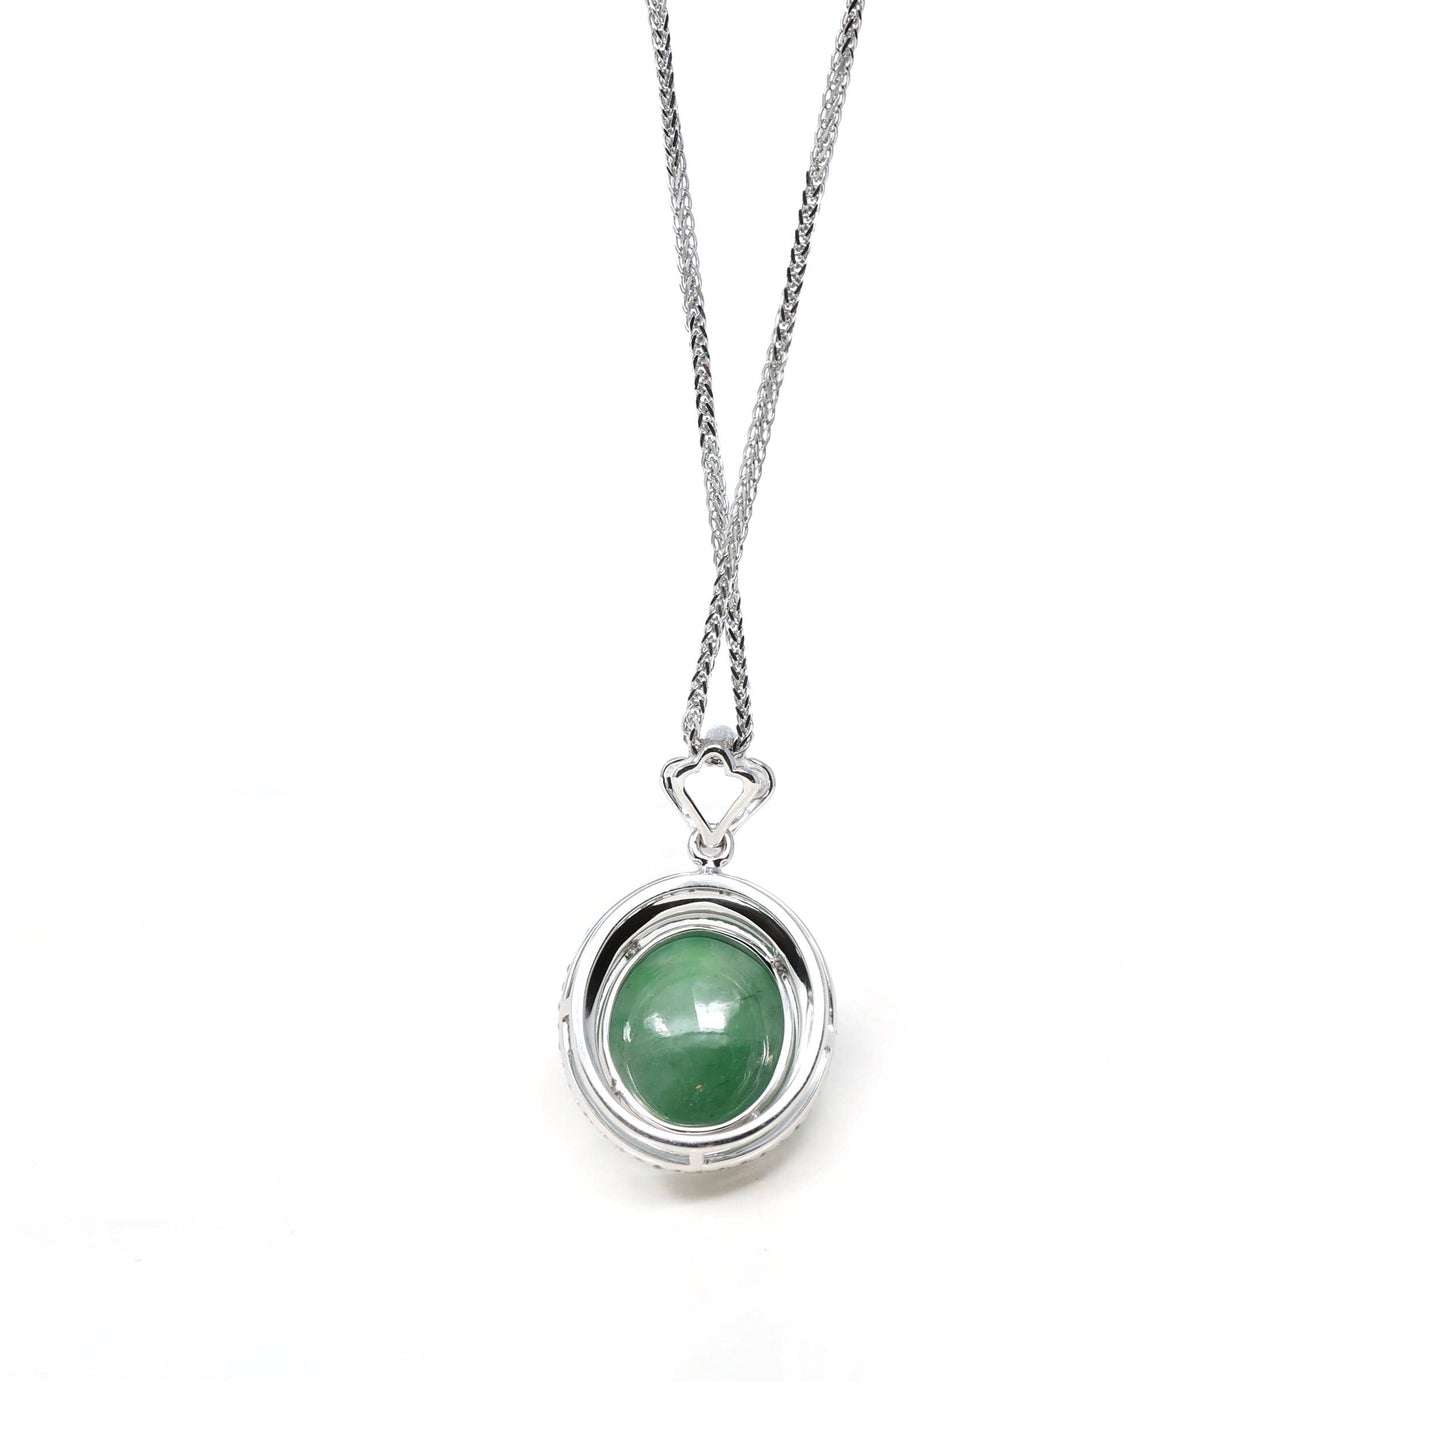 RealJade¨ Co. 18k Gold Jadeite Necklace 18K White Gold Oval Imperial Jadeite Jade Cabochon Necklace with Diamonds